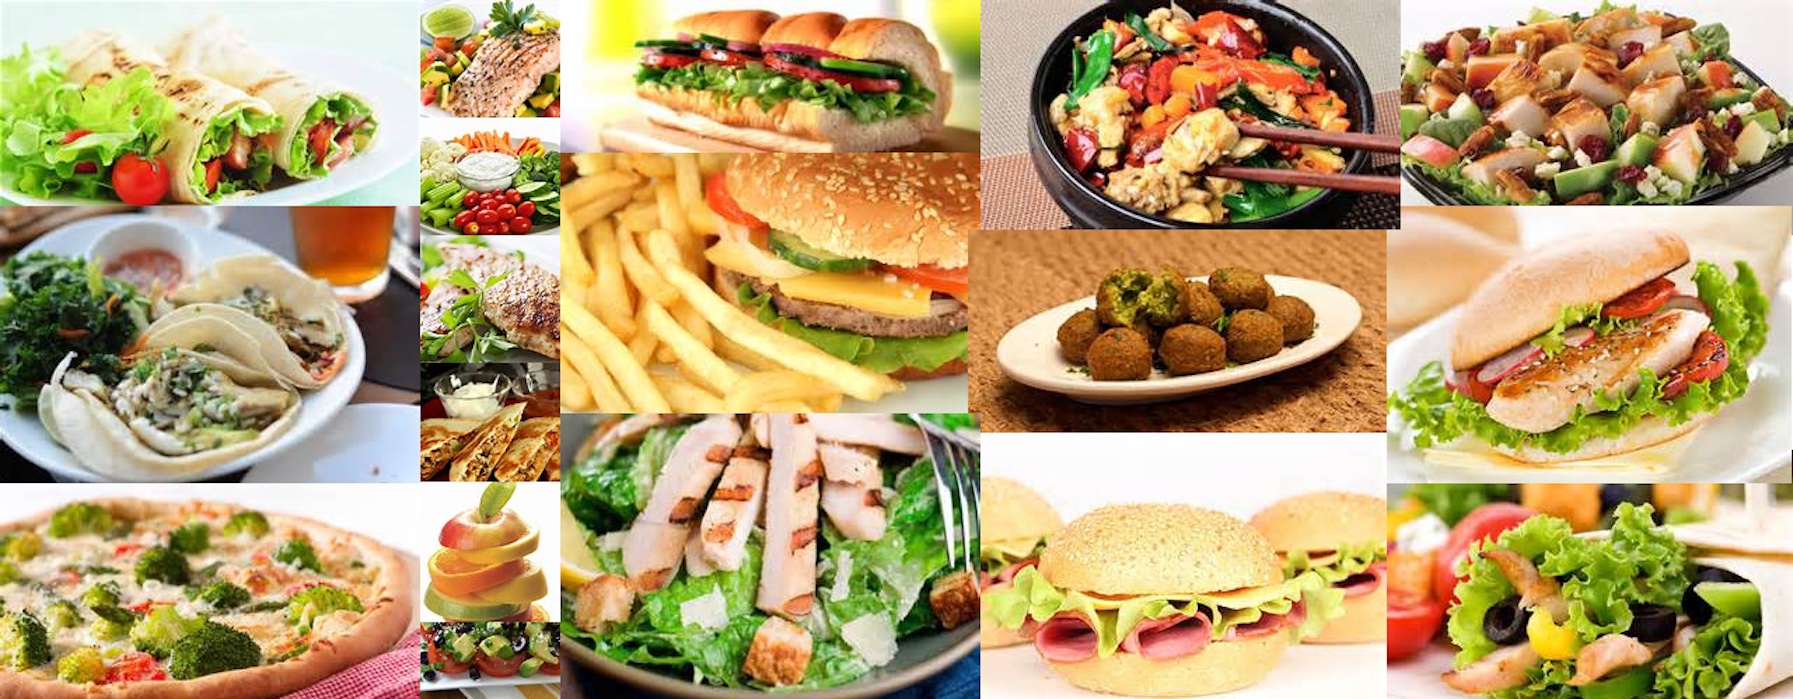 Healthiest Fast Food Meals